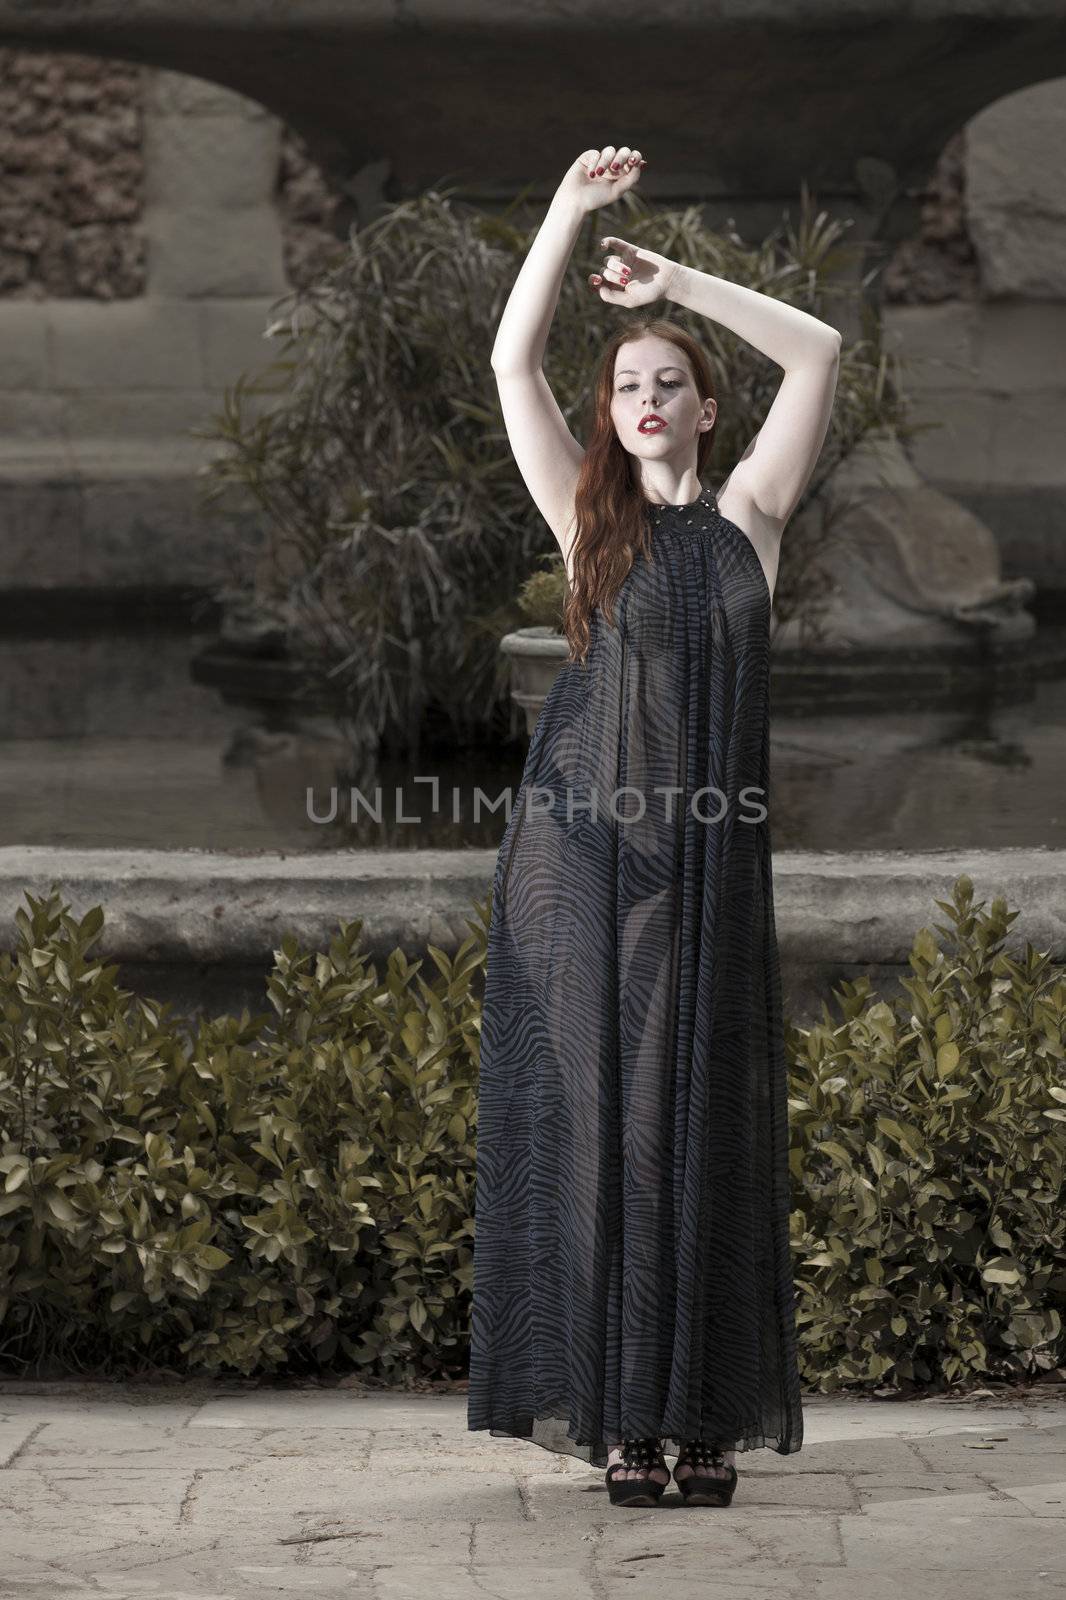 A beautiful young woman in a transparent dress in a garden